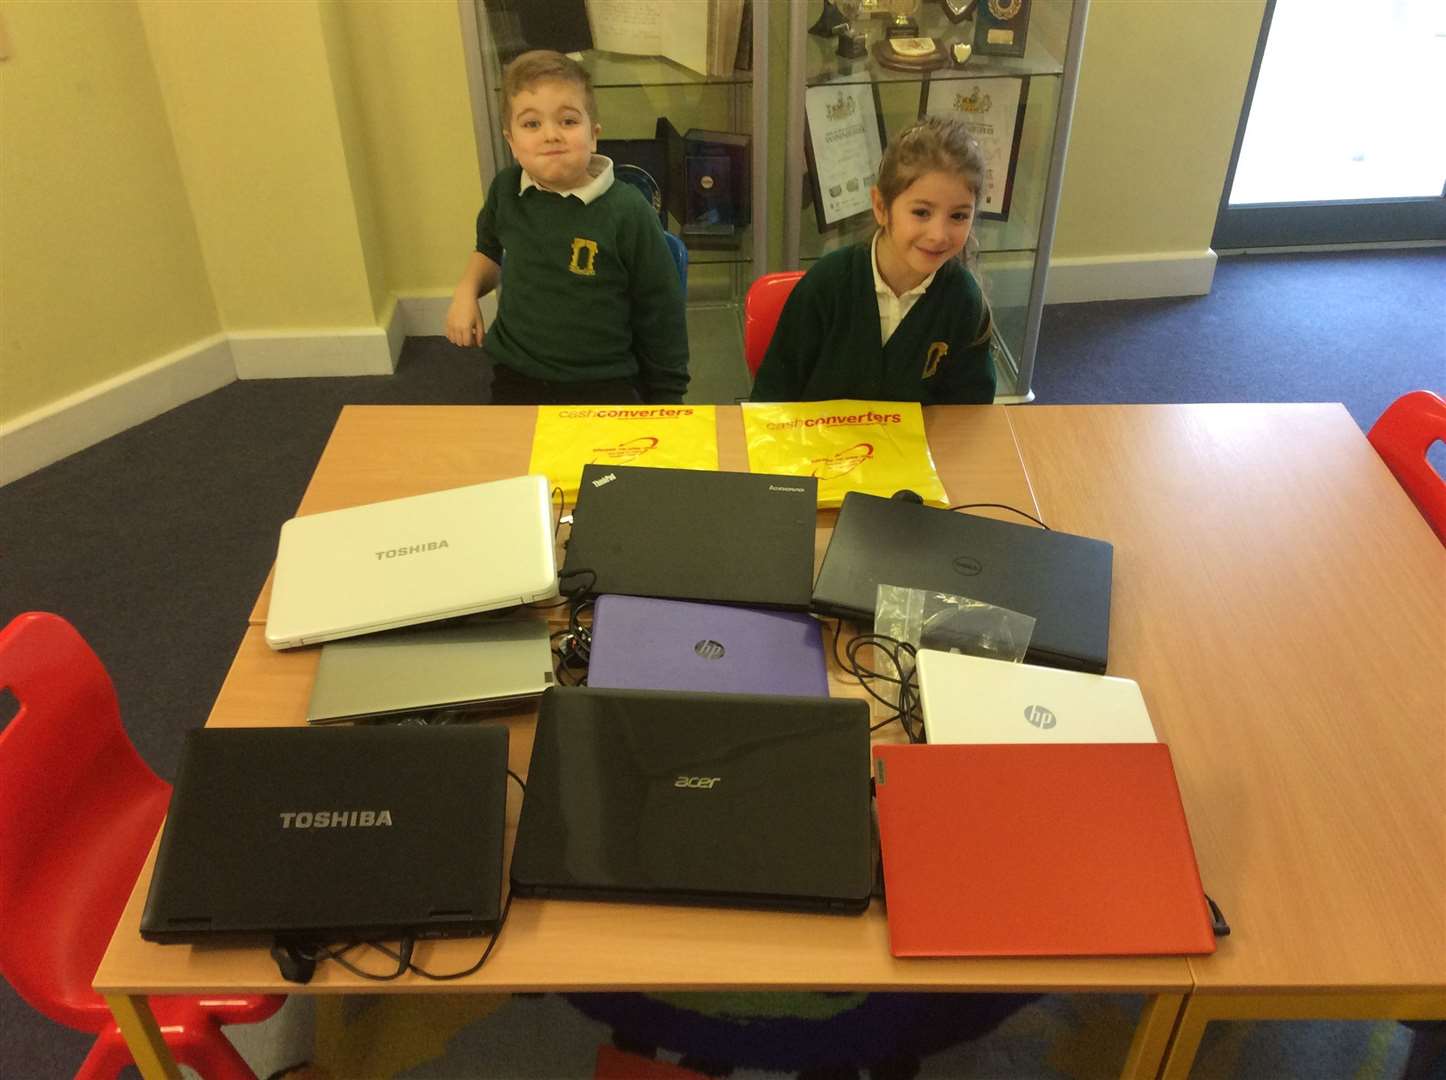 From left: Westgate Primary School pupils, Spencer Croft and Elif Bassoy with laptops donated from Cash Converters